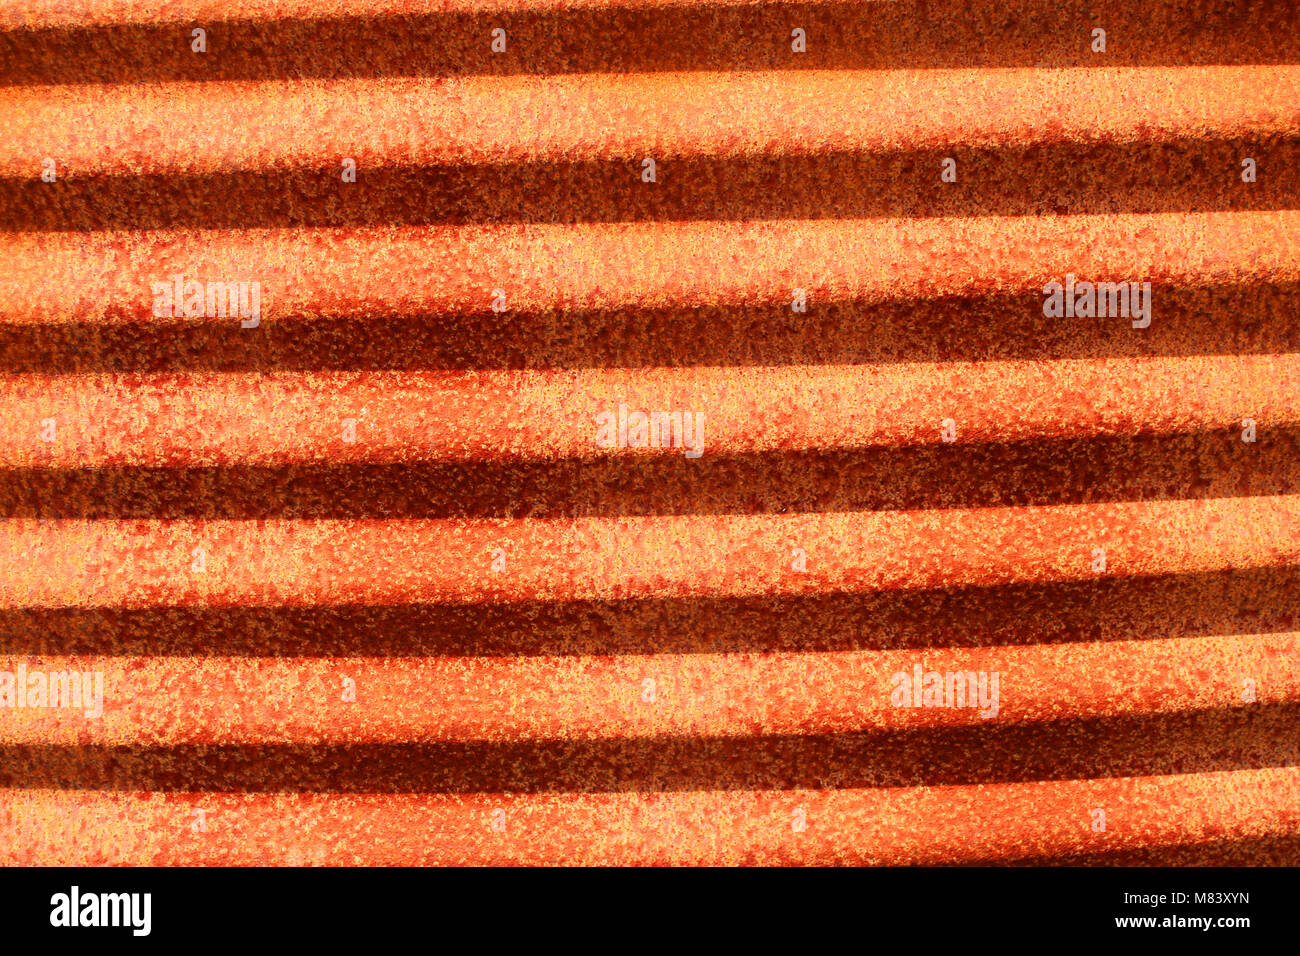 Rusty corrugated metal background texture Stock Photo